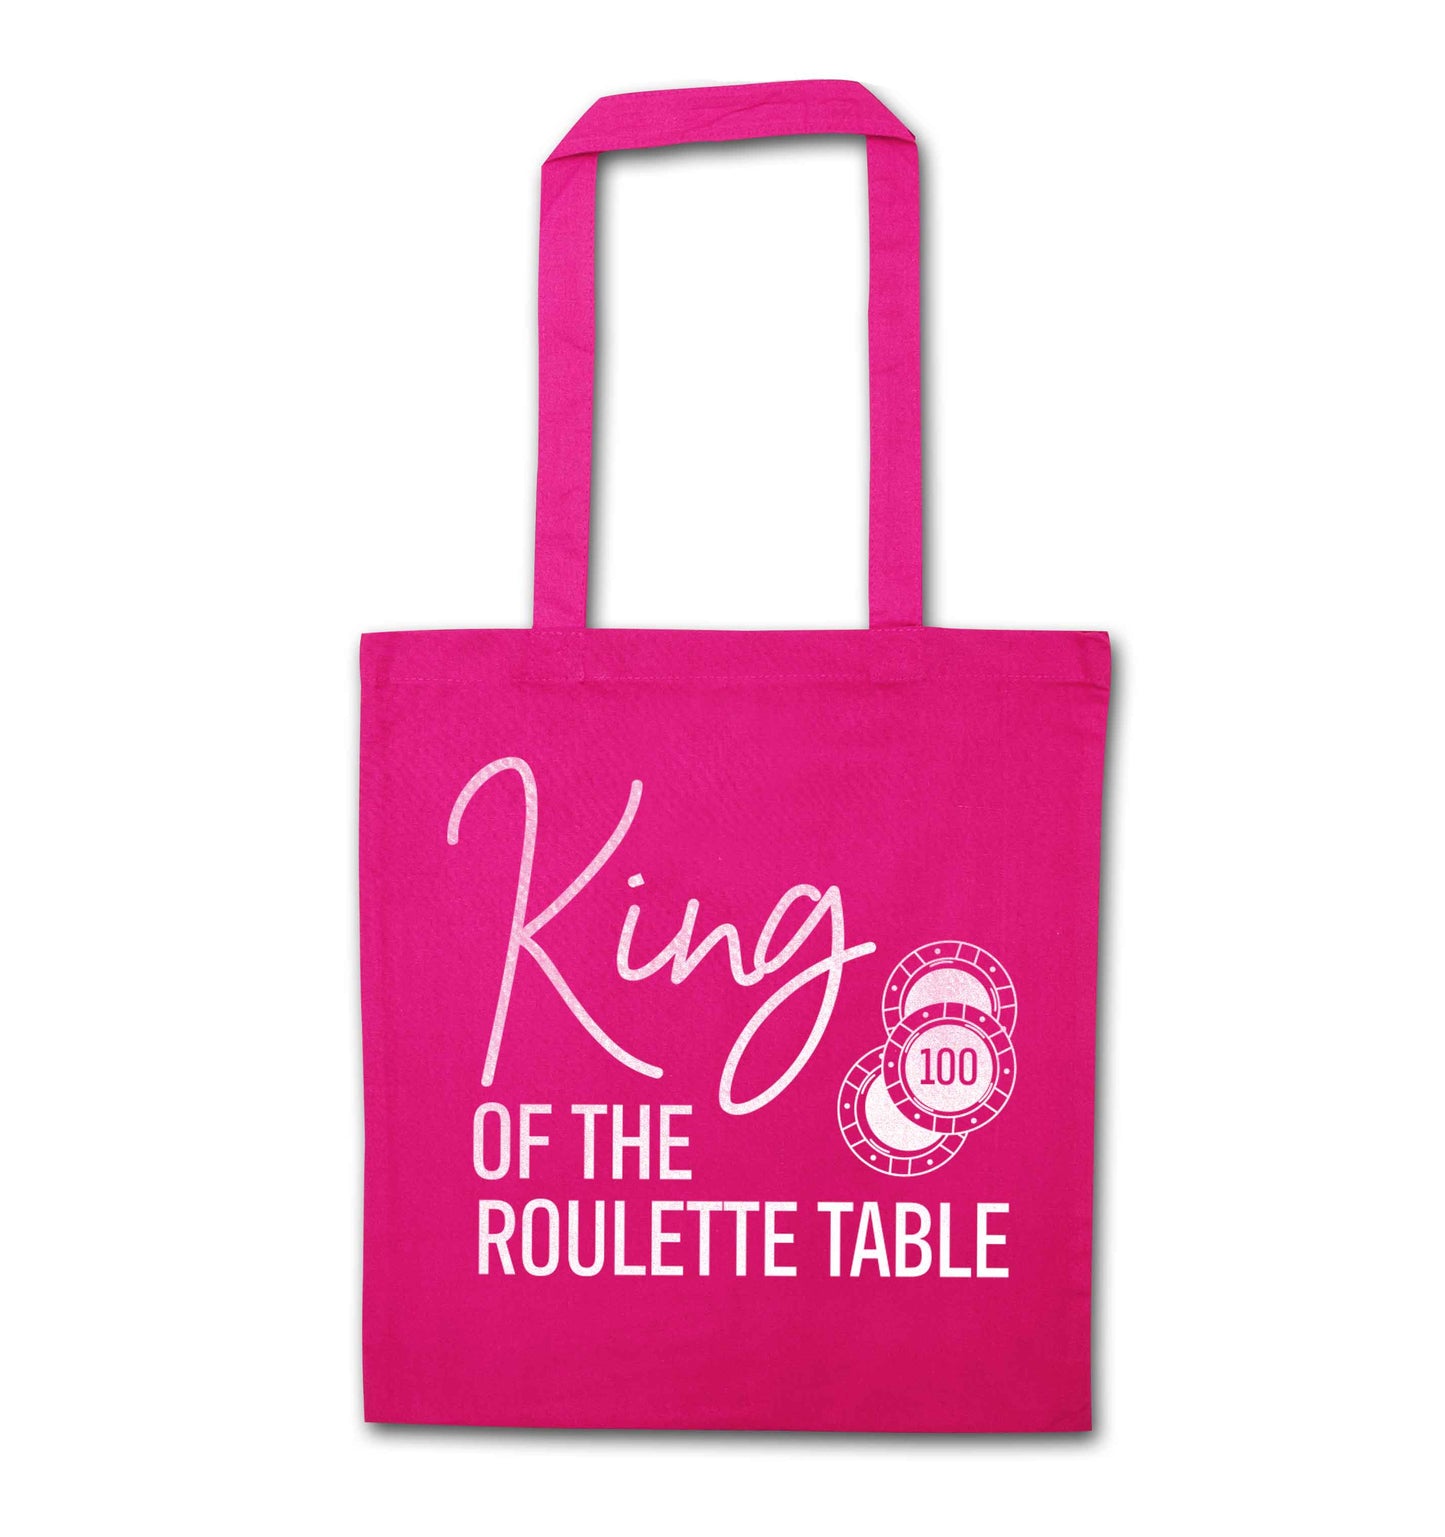 King of the roulette table pink tote bag